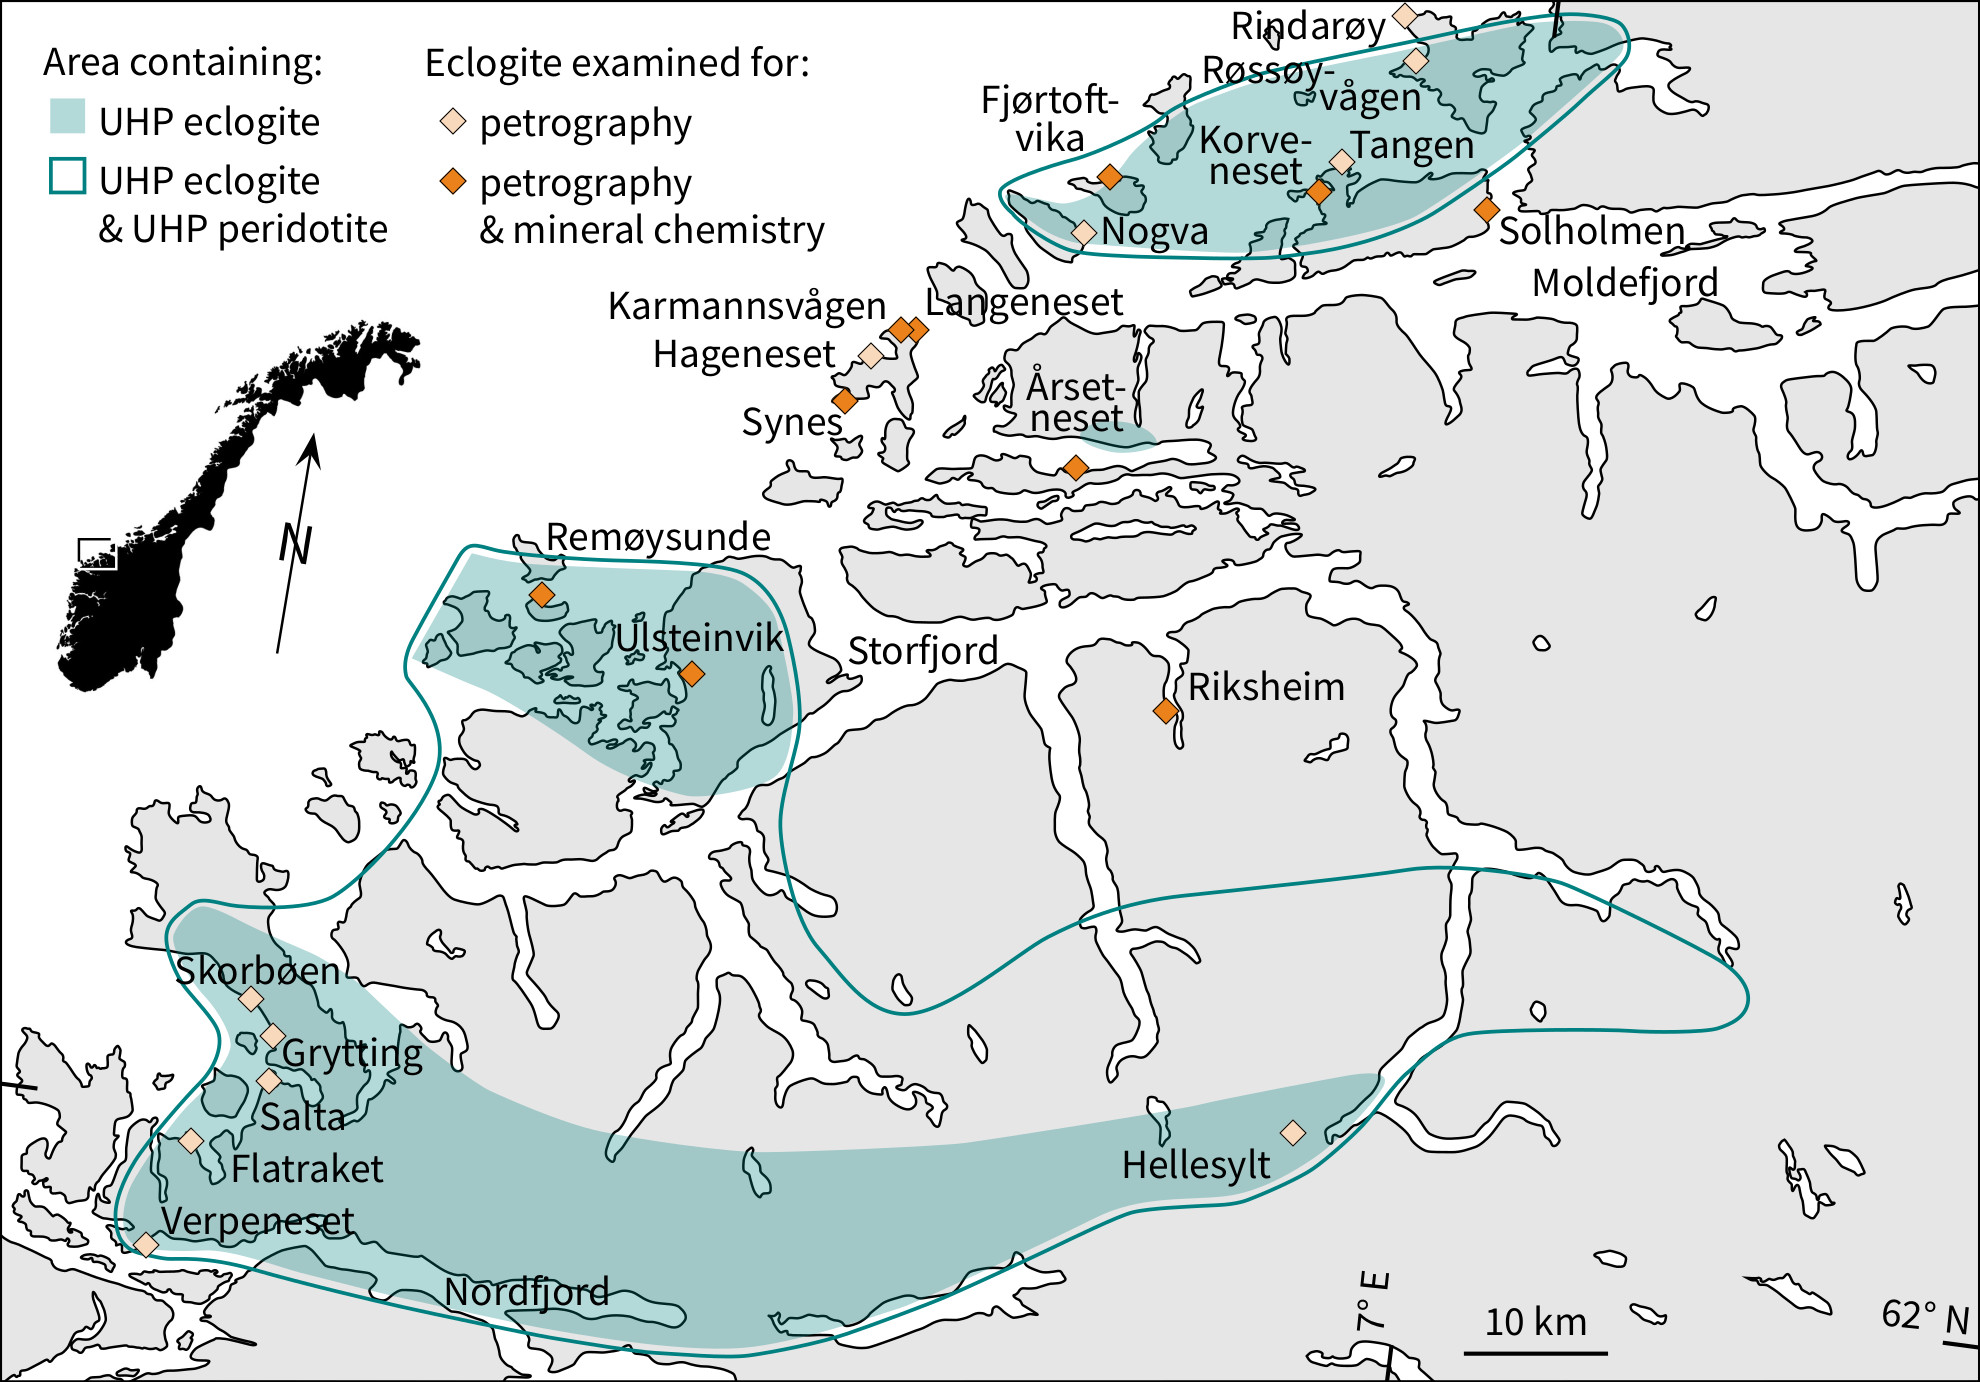 Simplified map of W Norway that shows the locations of eclogite samples being examined.